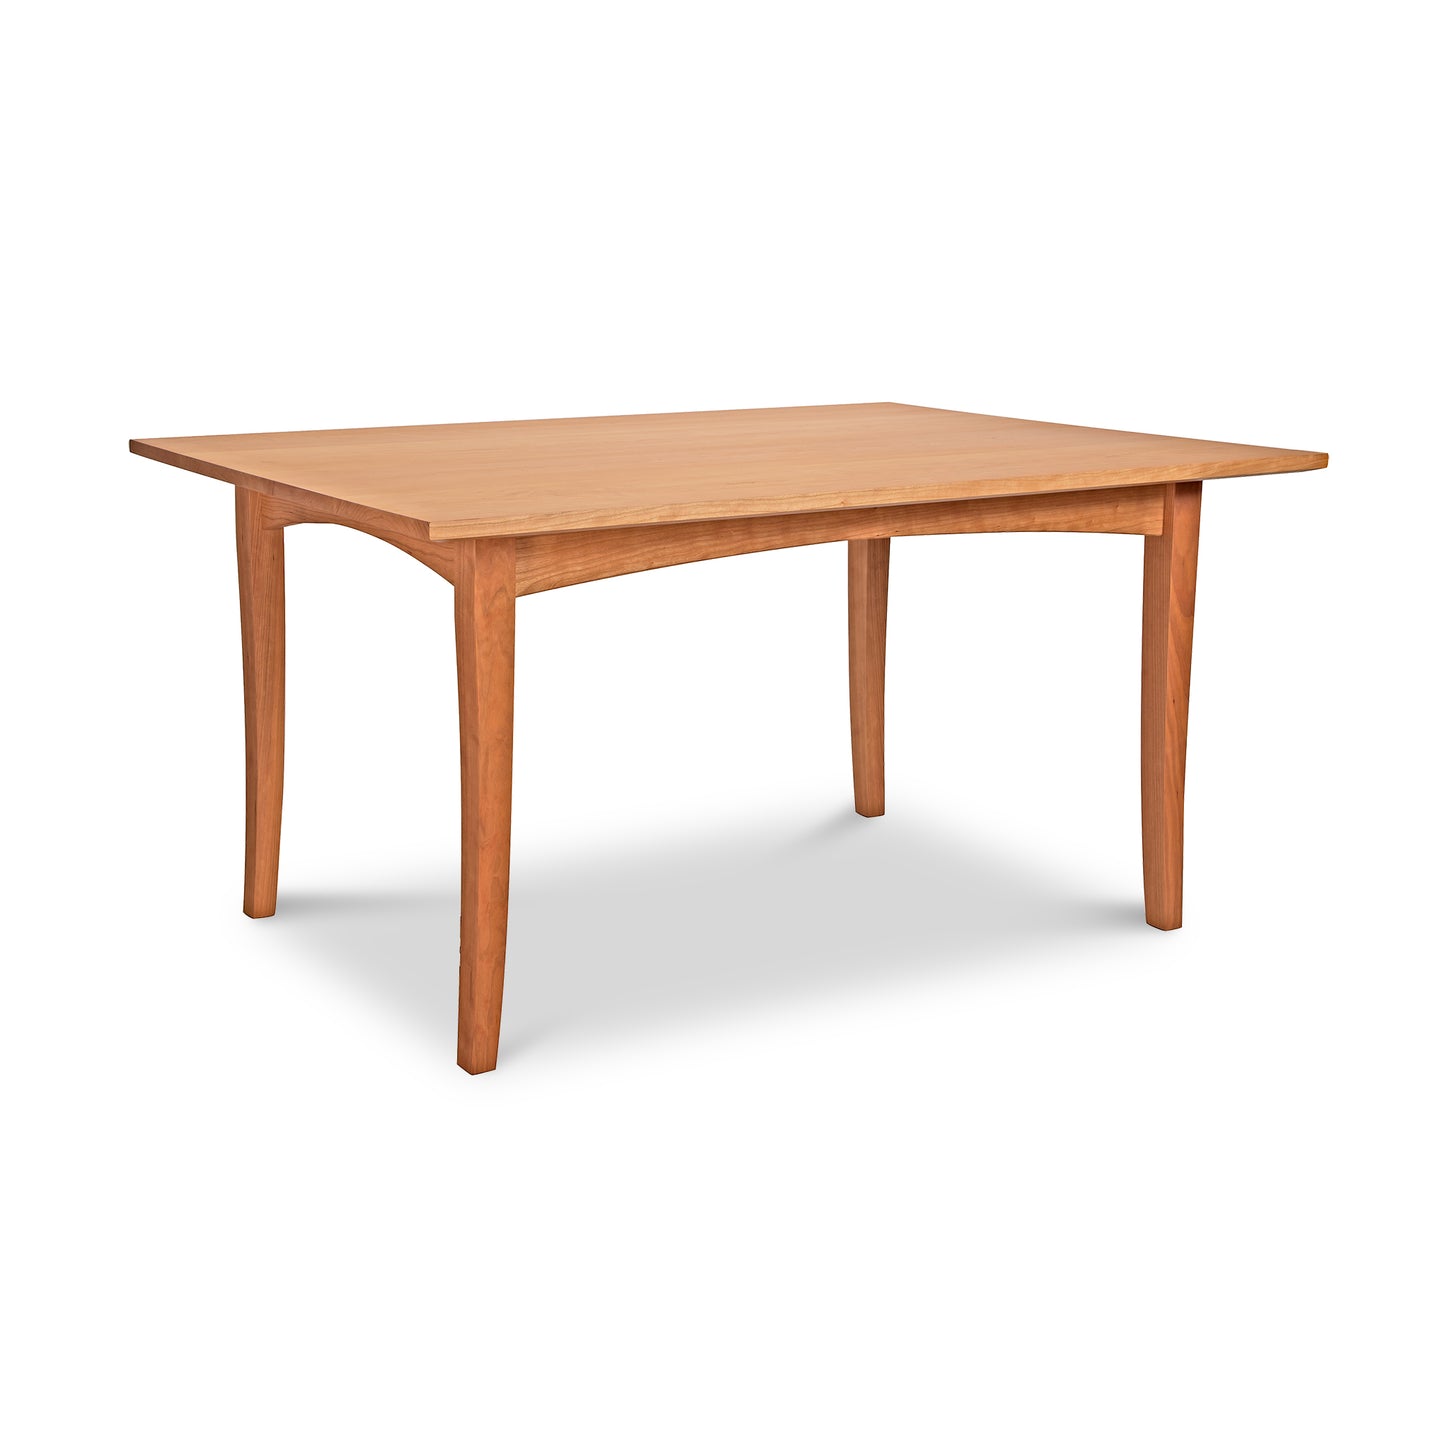 A simple hardwood dining table with a light brown finish and slightly tapering legs, isolated on a white background from the Maple Corner Woodworks American Shaker Rectangular Solid Top Table Collection.